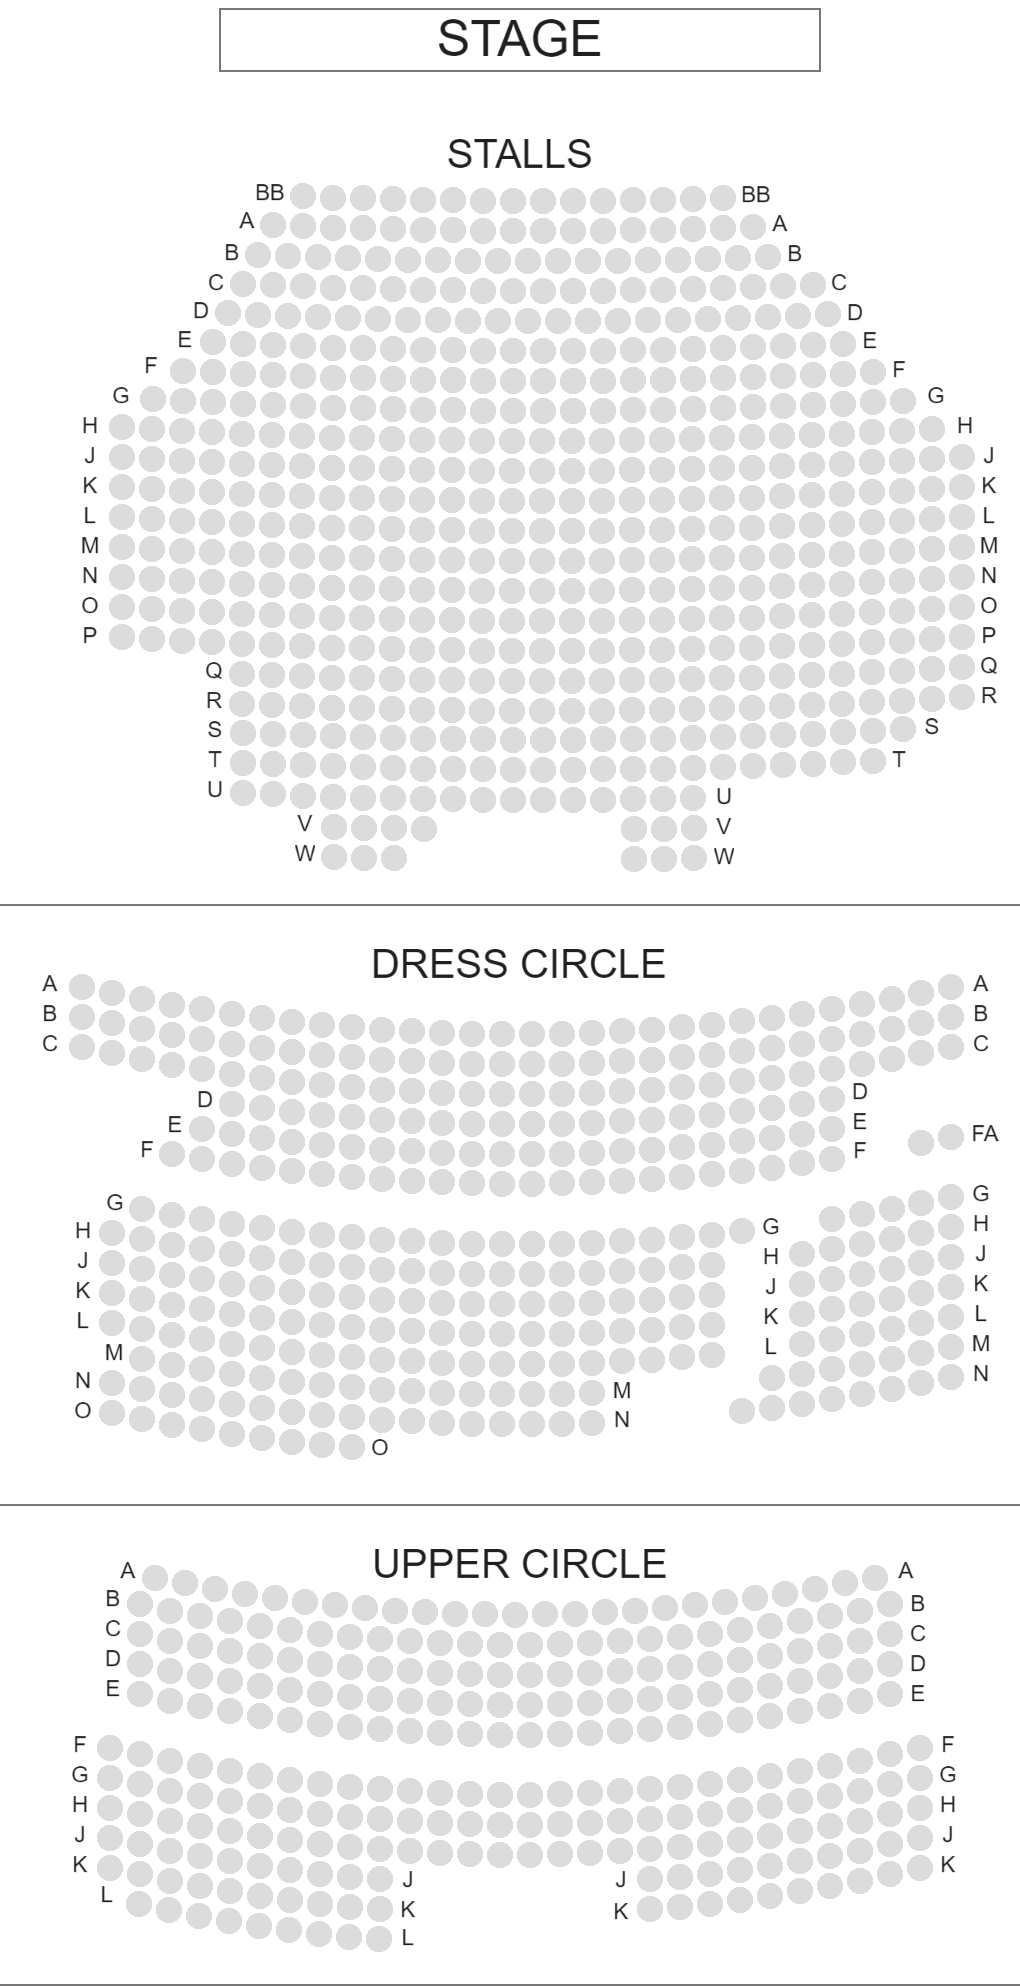 Dress Circle Restrictions - Theatre Royal Waterford